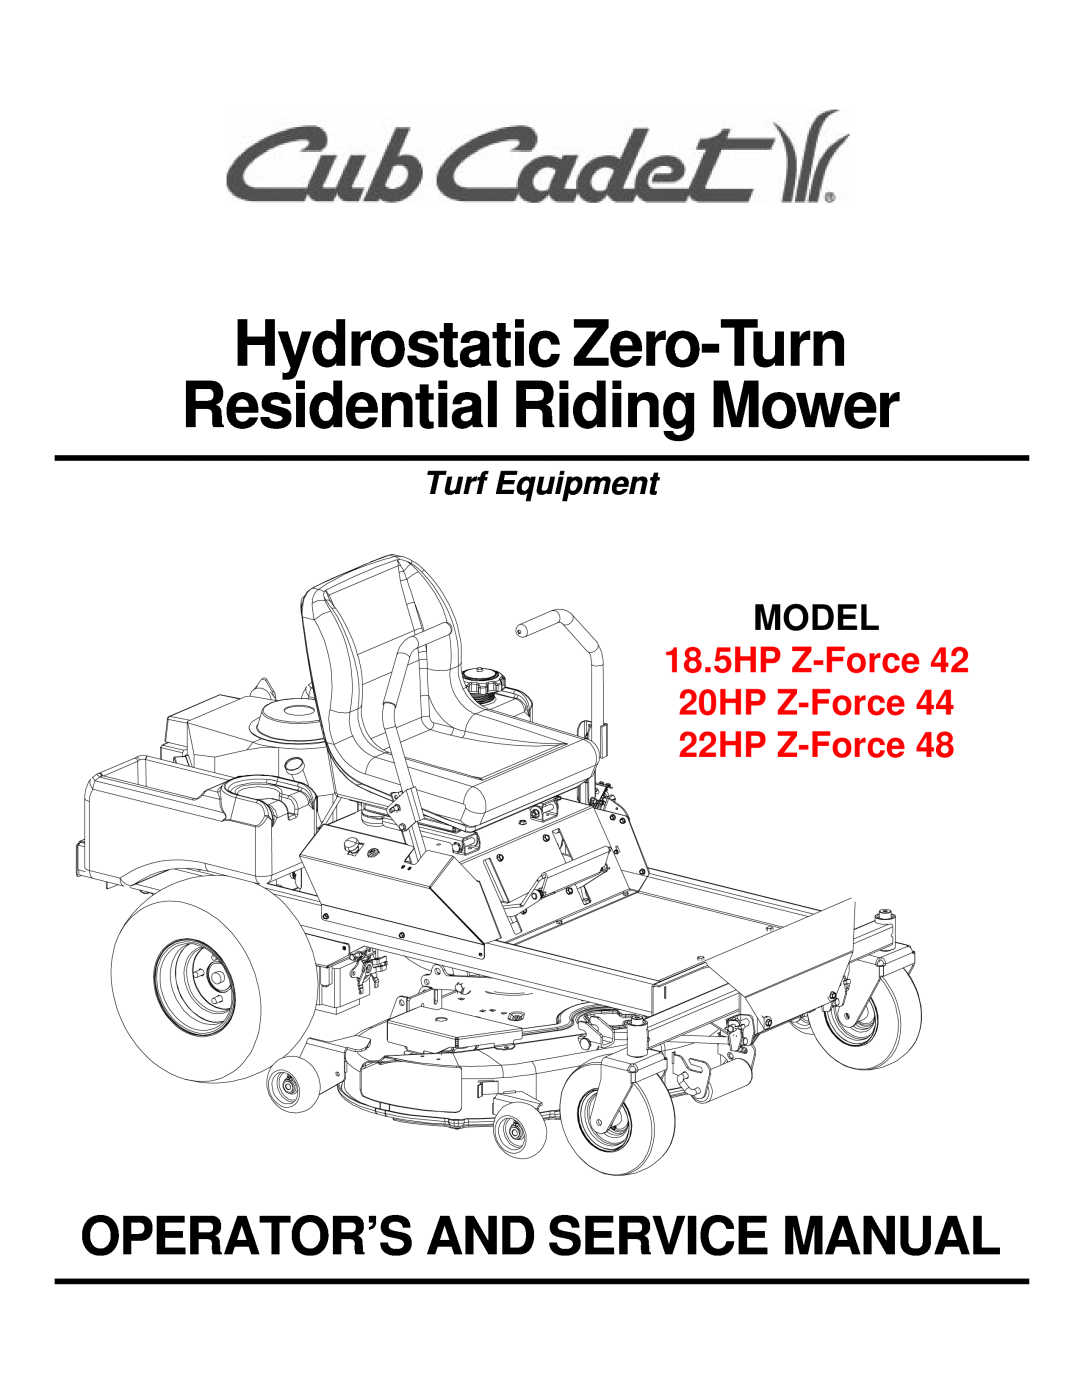 Cub Cadet 18.5HP Z-Force 42 service manual Hydrostatic Zero-Turn Residential Riding Mower, Operator’S And Service Manual 